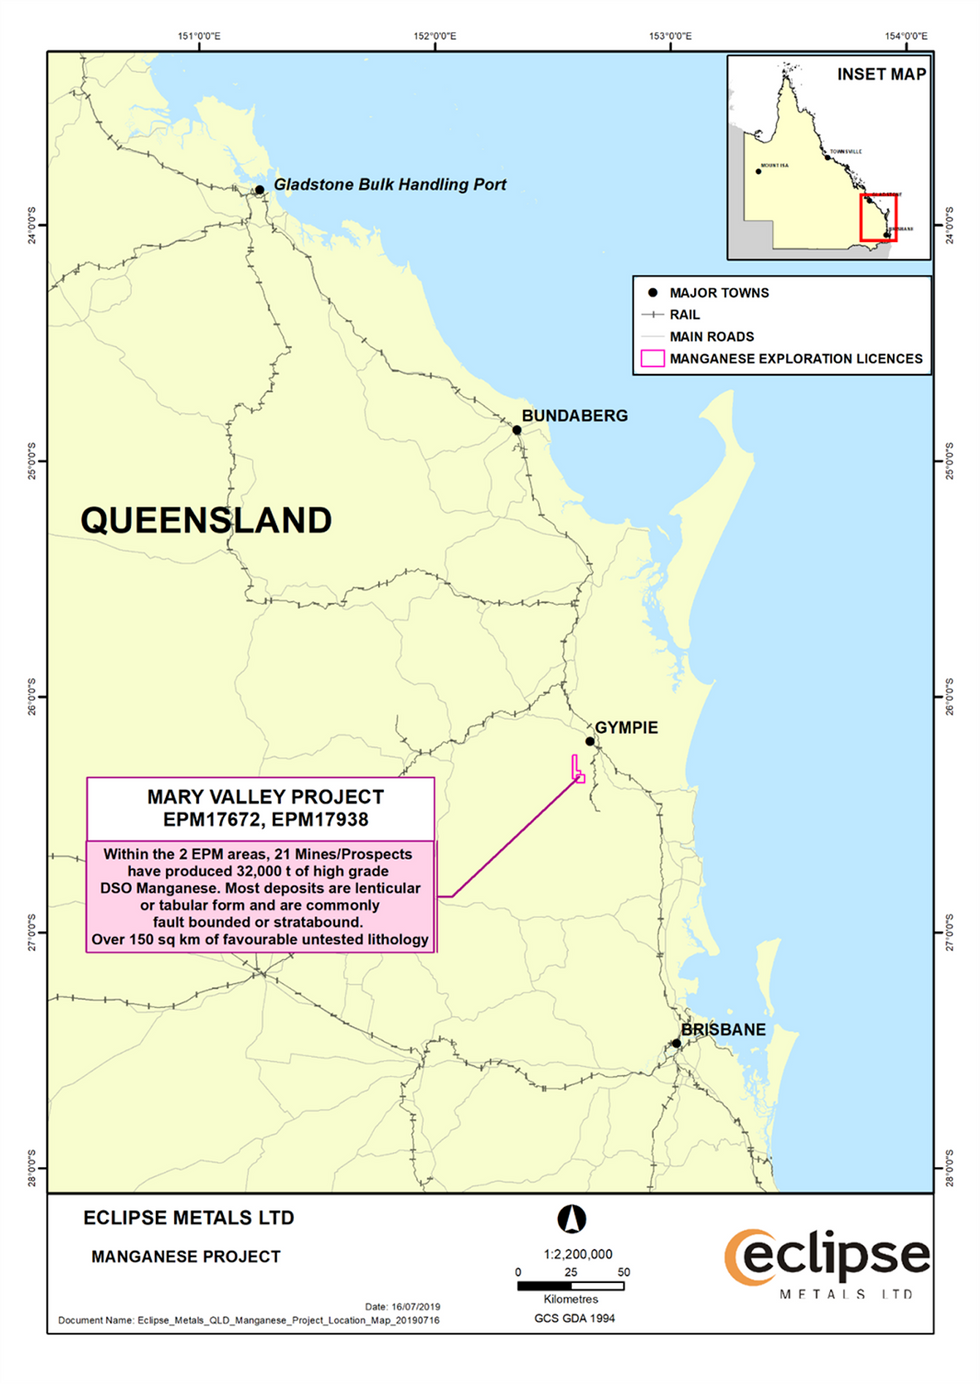 Mary Valley Manganese Project